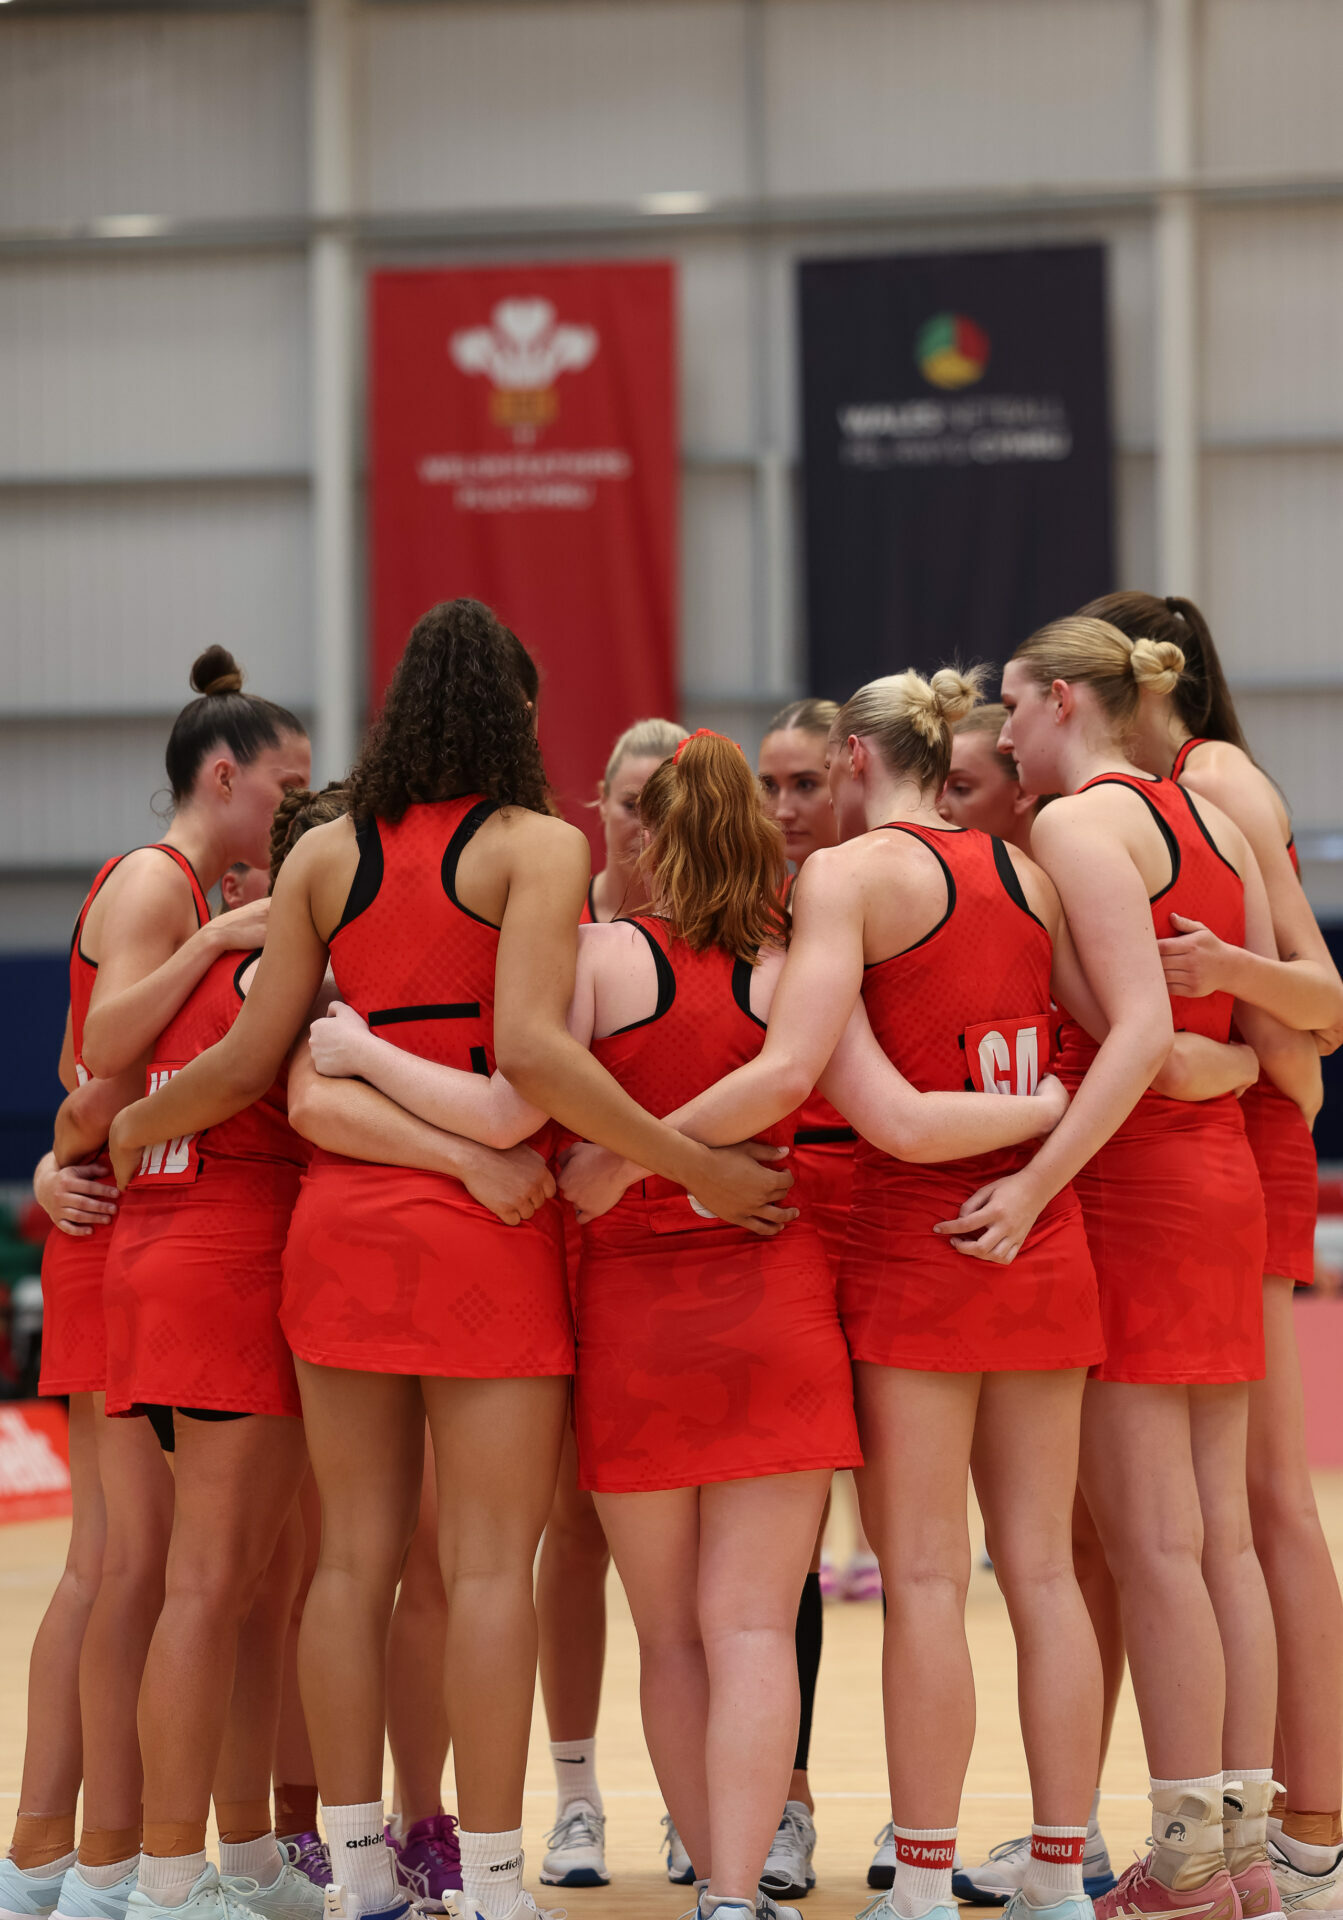 09.07.23 - Welsh Feathers v Scottish Thistles, Netball World Cup Warm-up Match -